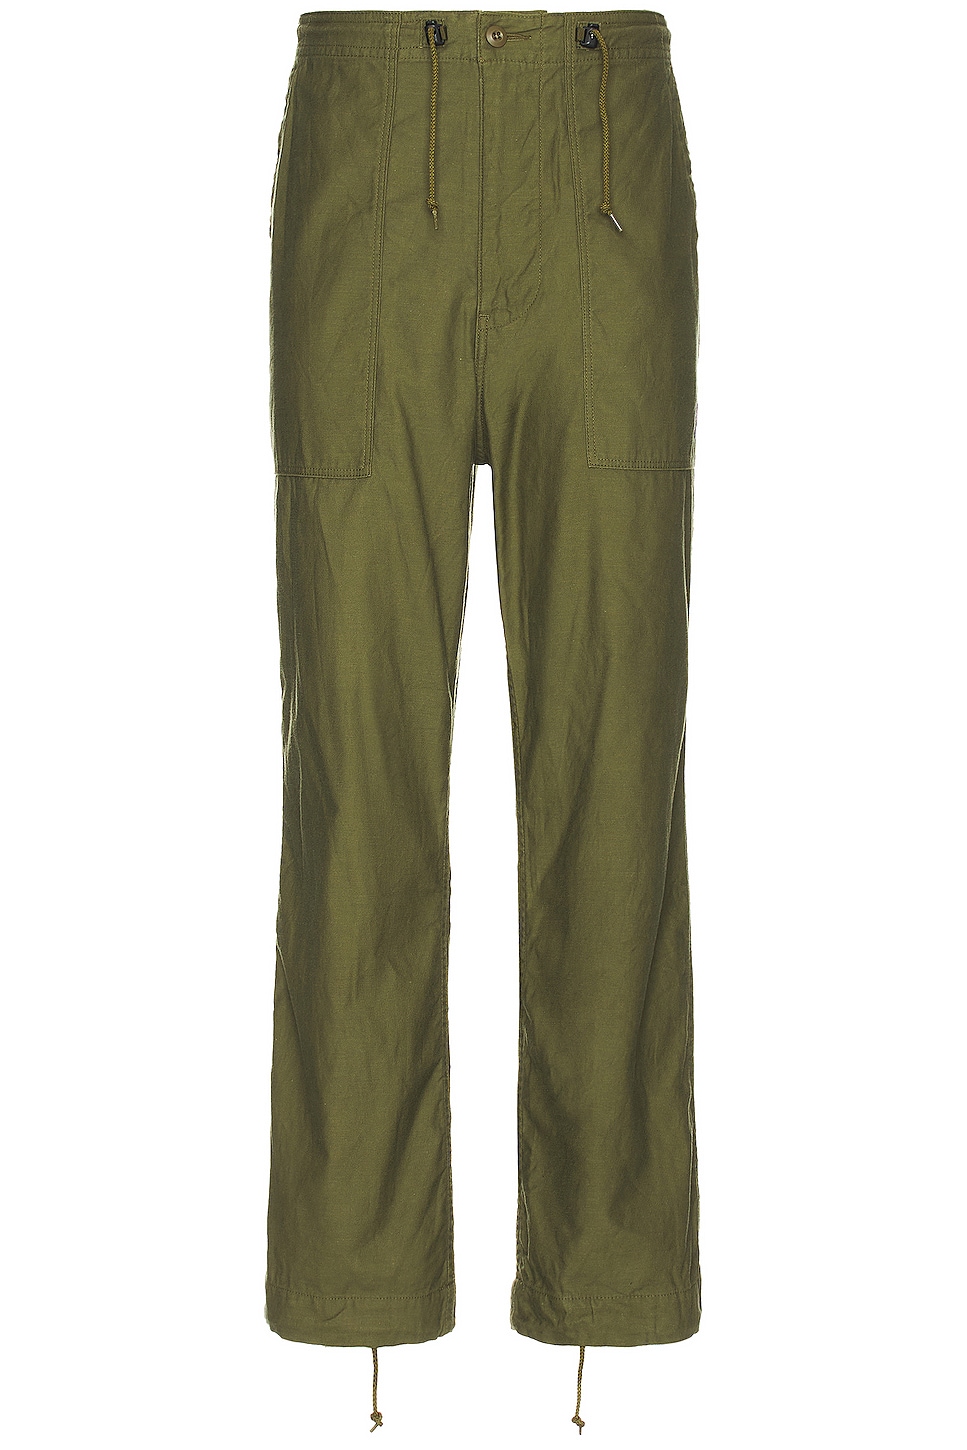 Image 1 of Needles String Fatigue Pant in Olive